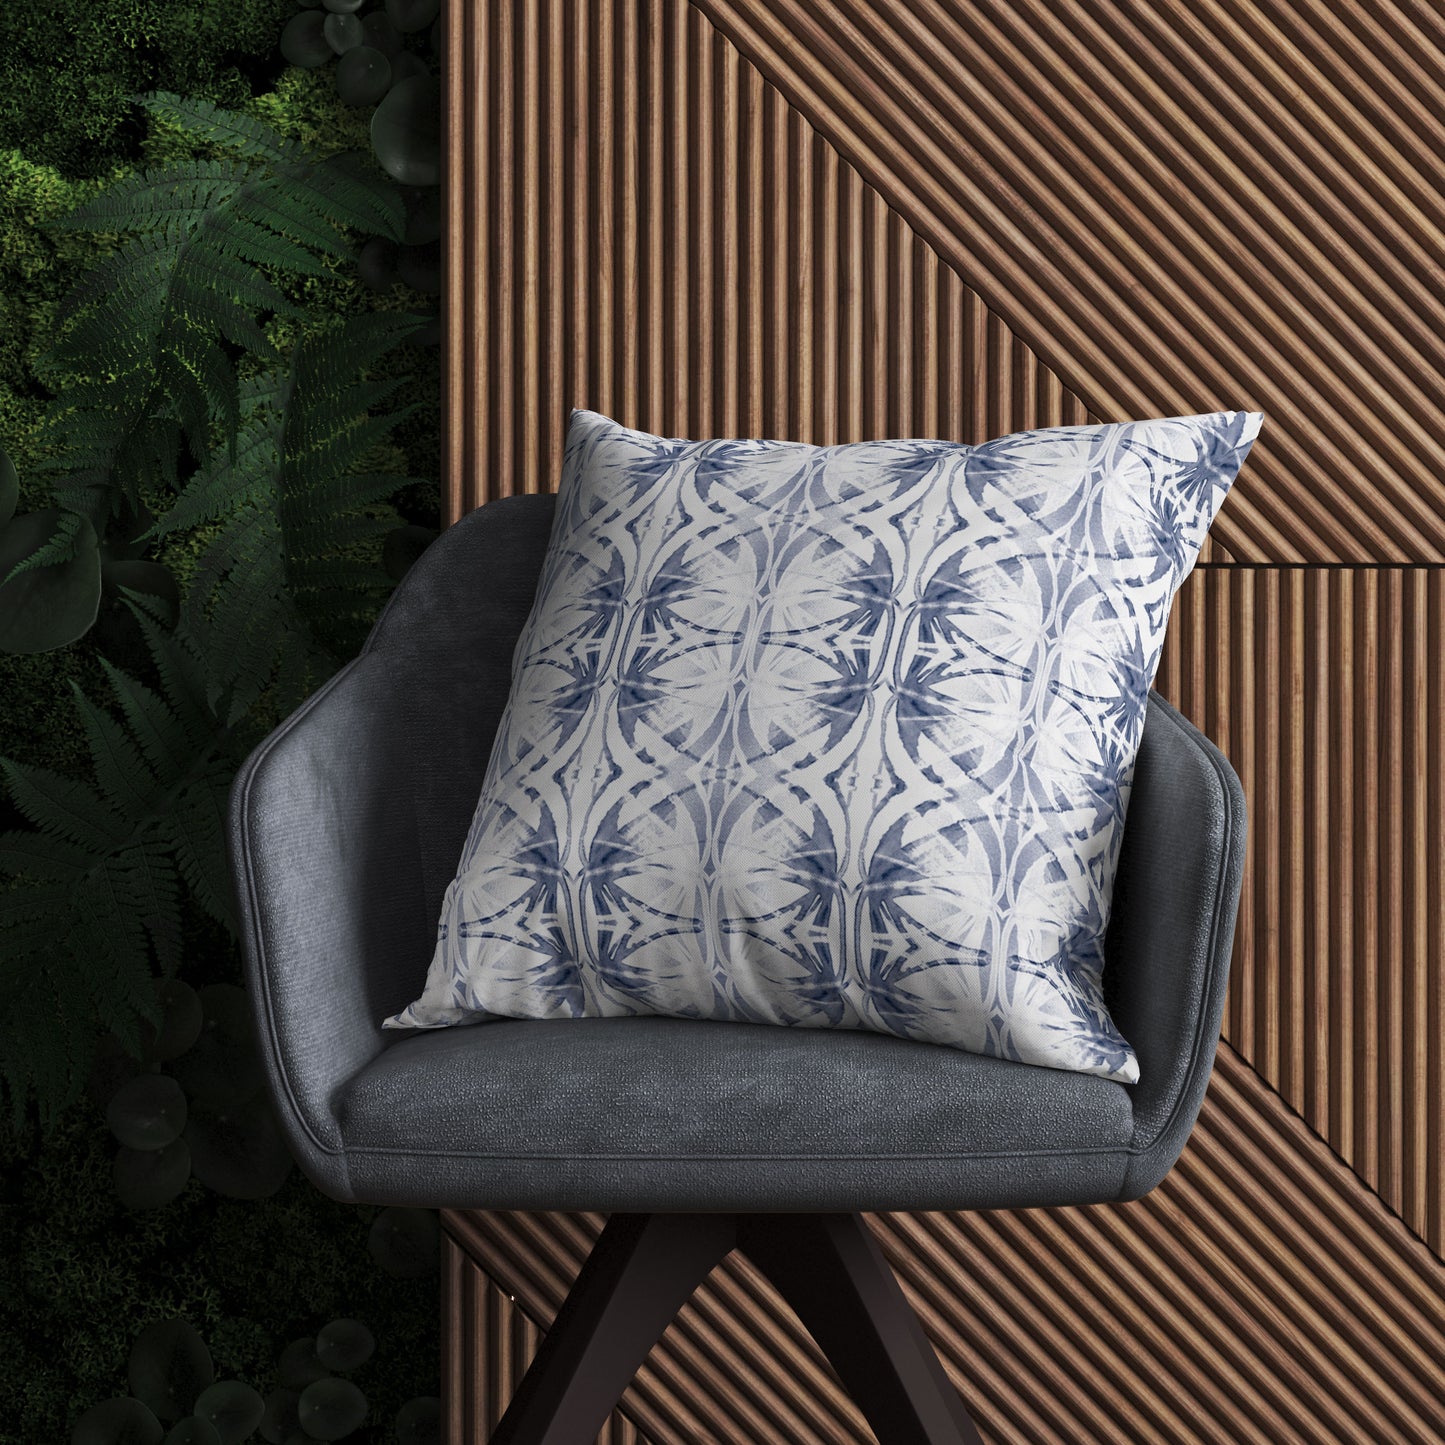 Blue and white abstract pattern pillow sitting on a blue chair in front of a leafy and textured wall.